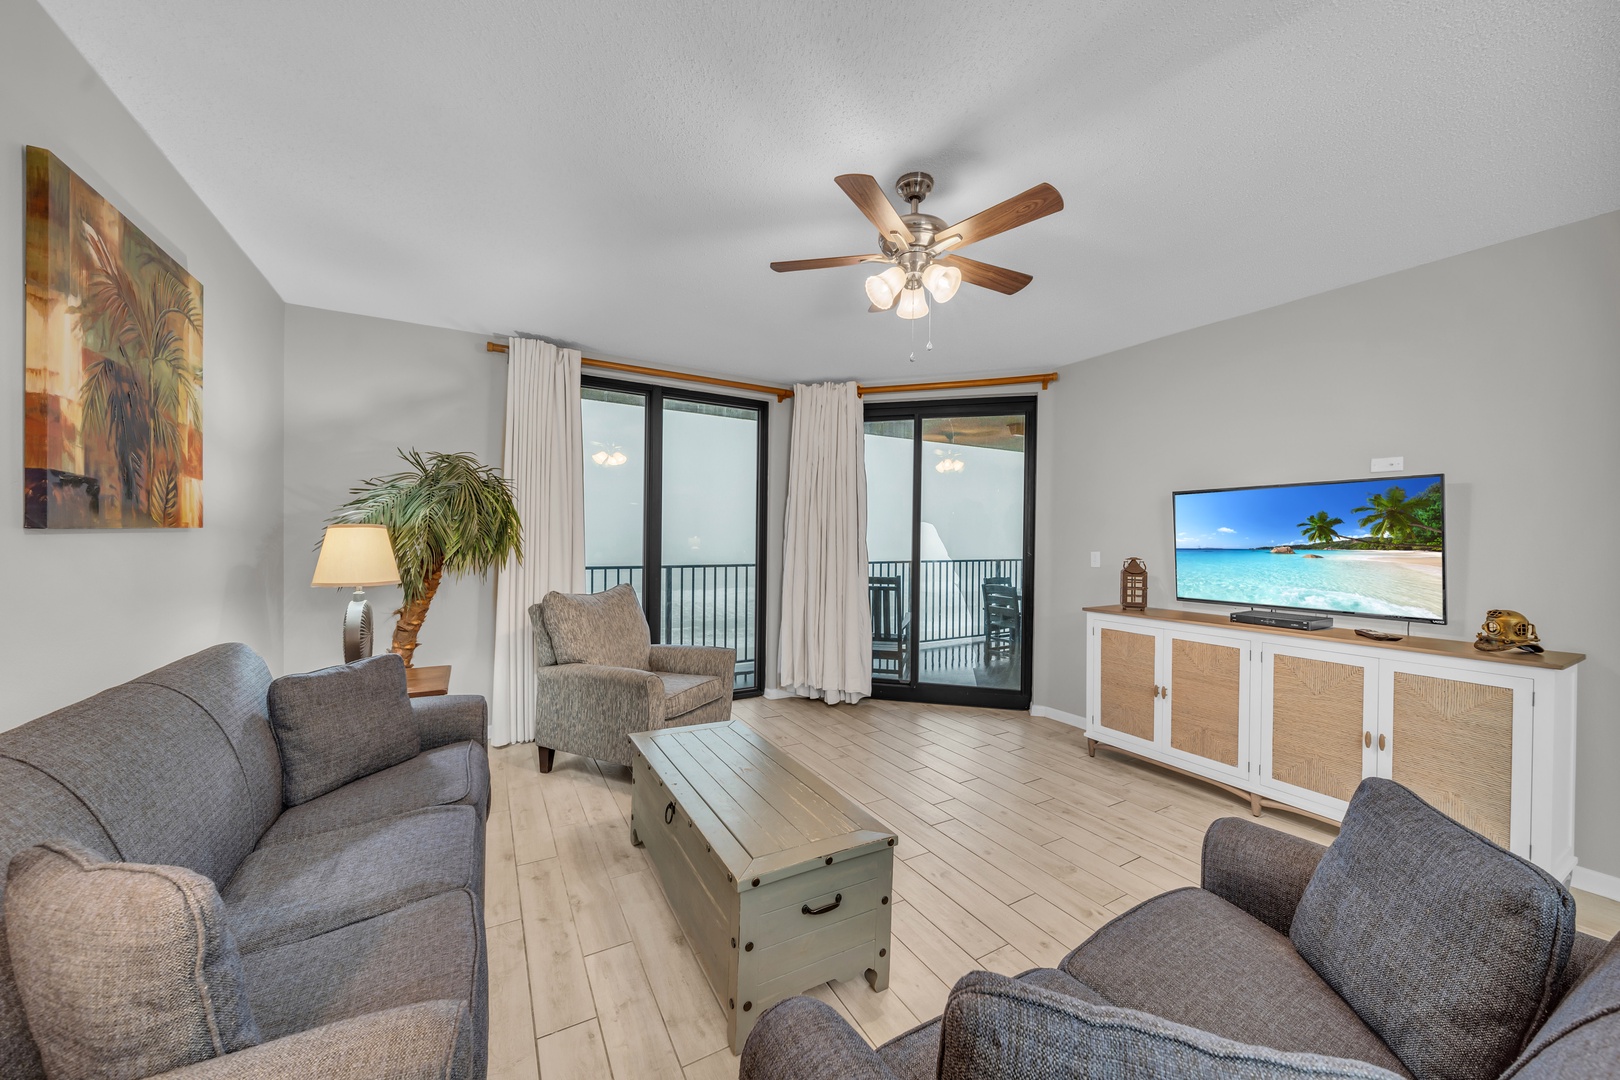 The spacious Living Room welcomes you after a day of seaside adventures.